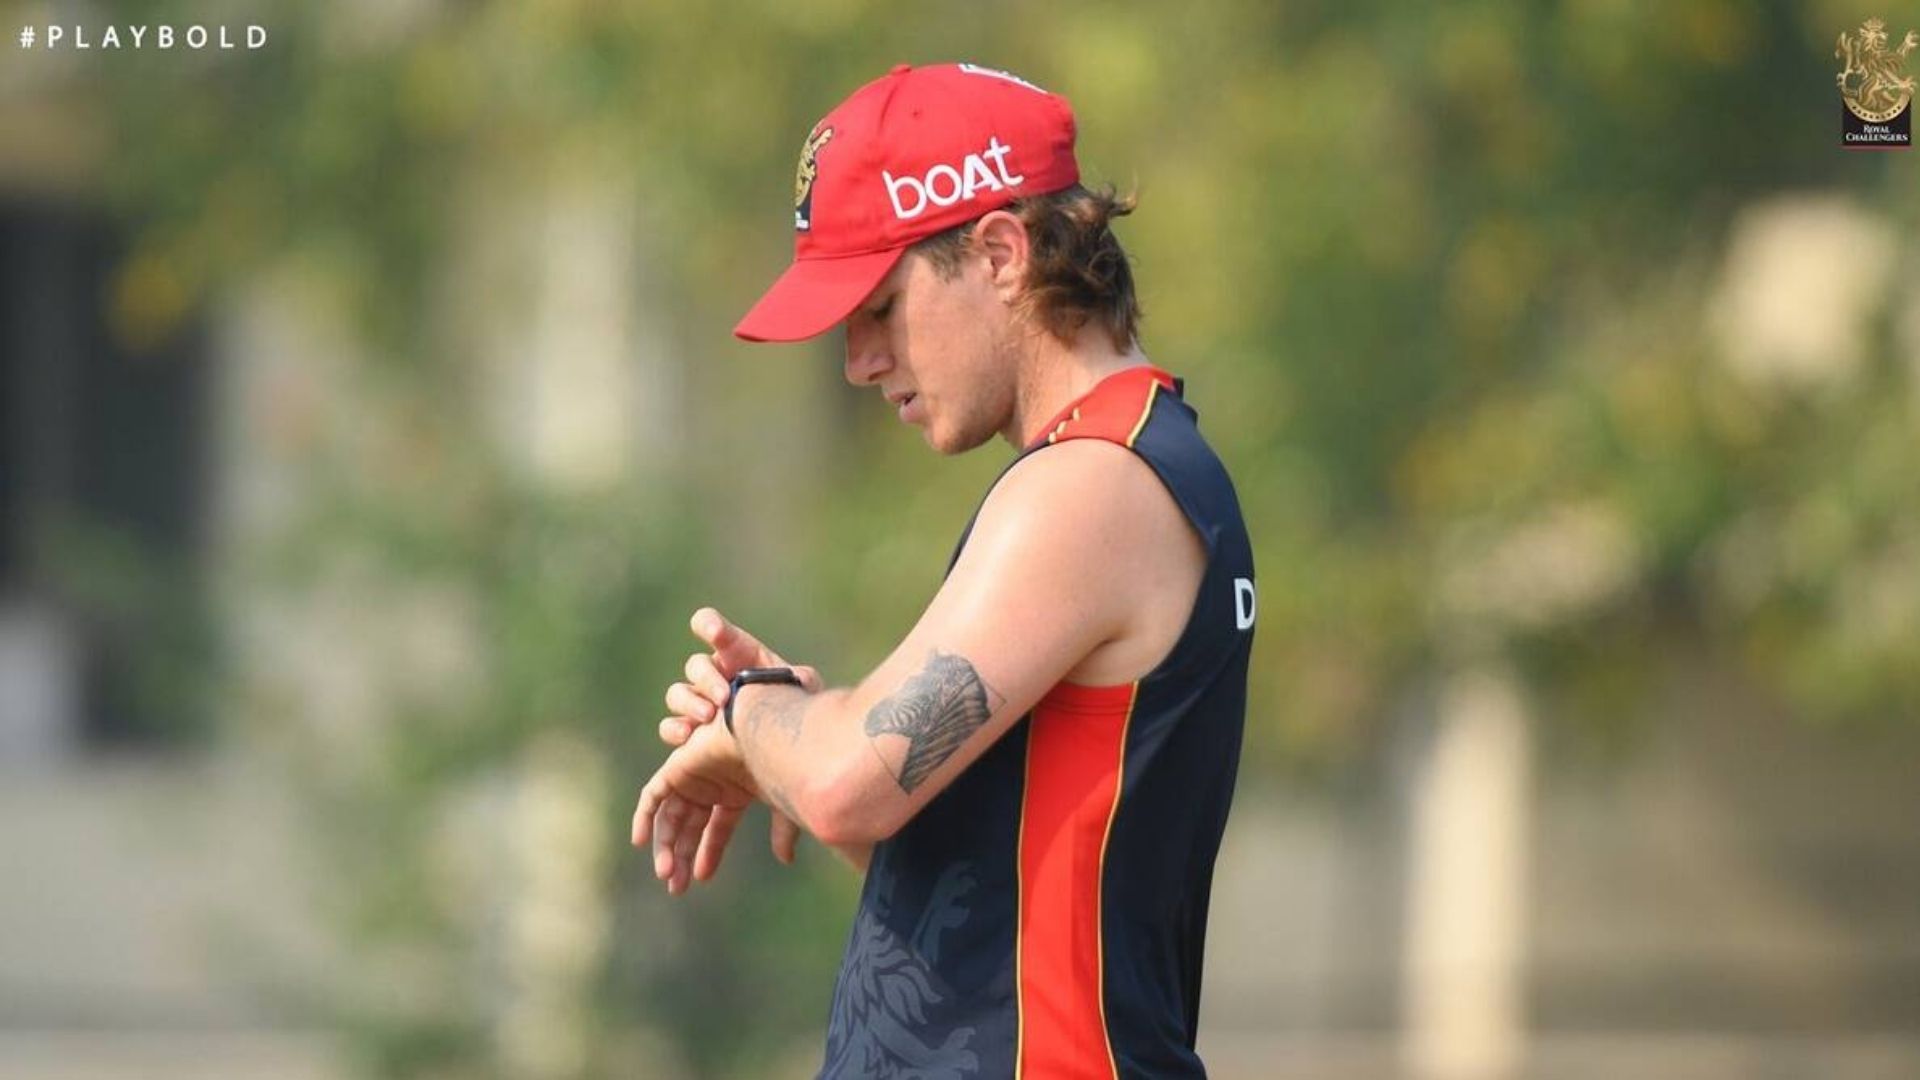 IPL 2021: Adam Zampa, who was initially Rs 1.5 crore, and is yet to play a game. (Picture Credits: Twitter/RCB)